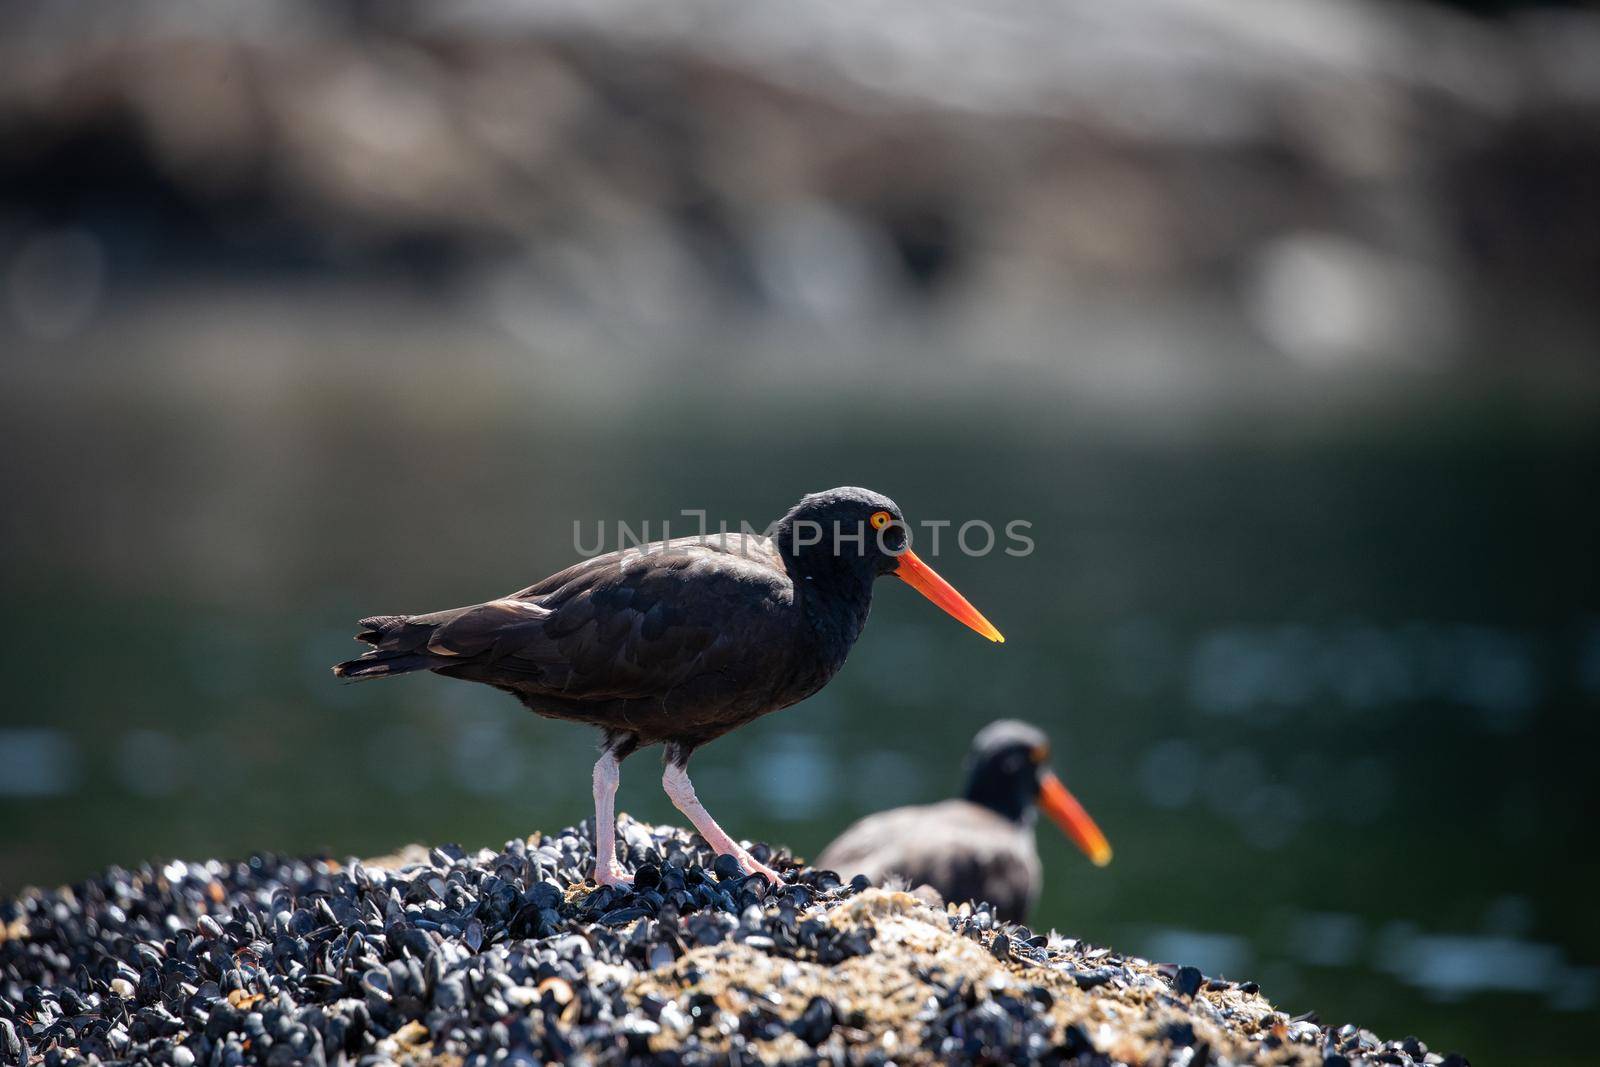 Black Oystercatcher on shells on a rock with another bird behind by Granchinho